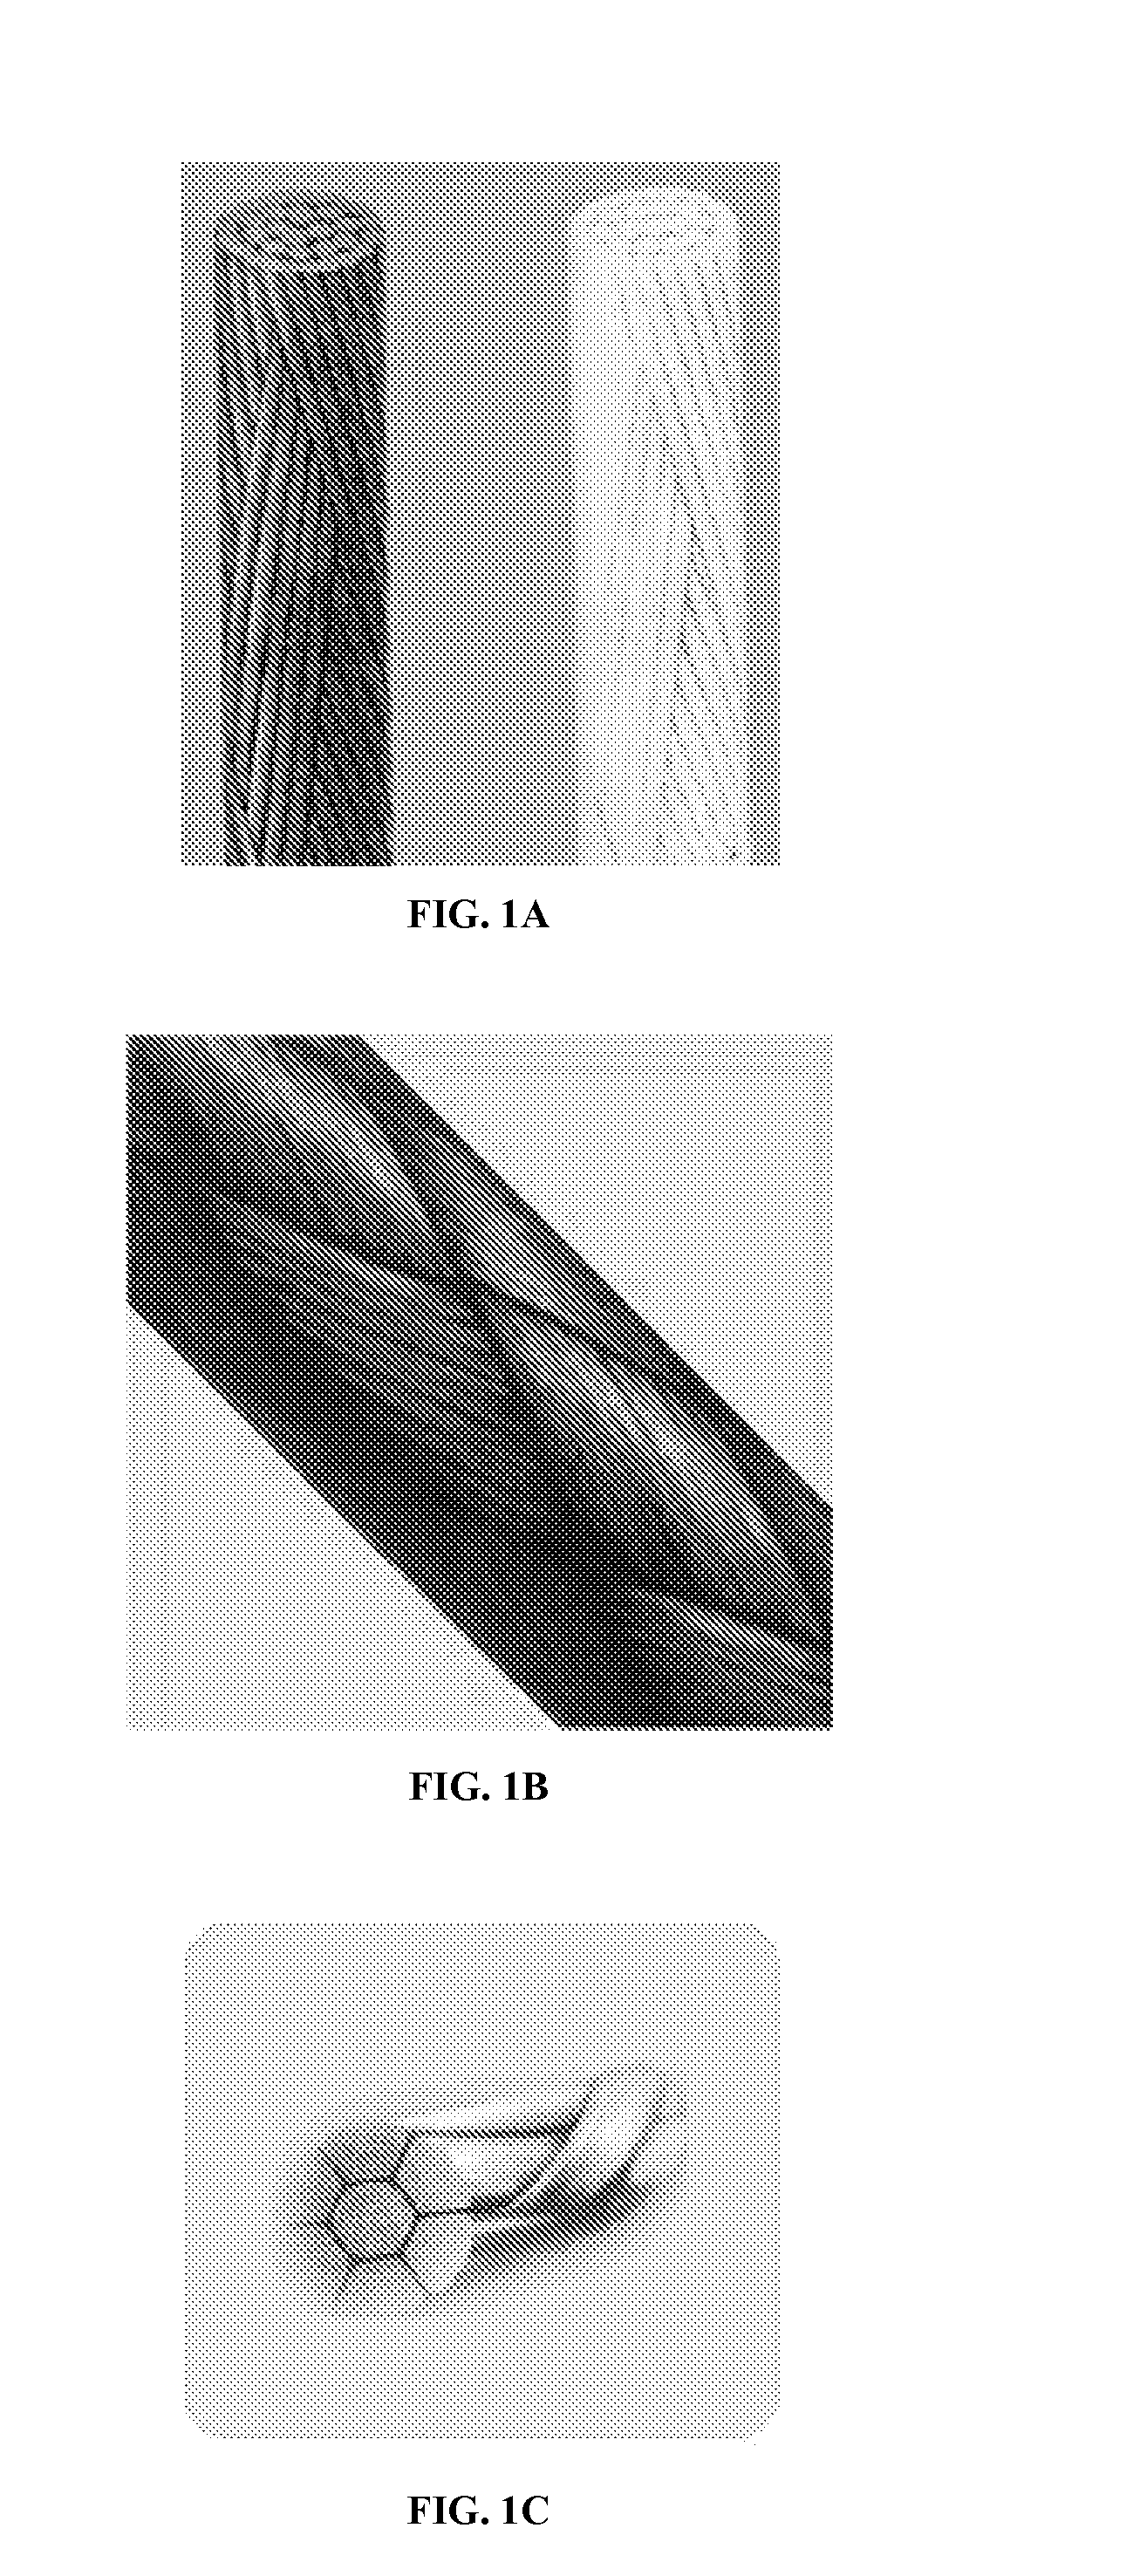 Mechanically Strong Absorbable Polymeric Blend Compositions of Precisely Controllable Absorption Rates, Processing Methods, And Products Therefrom